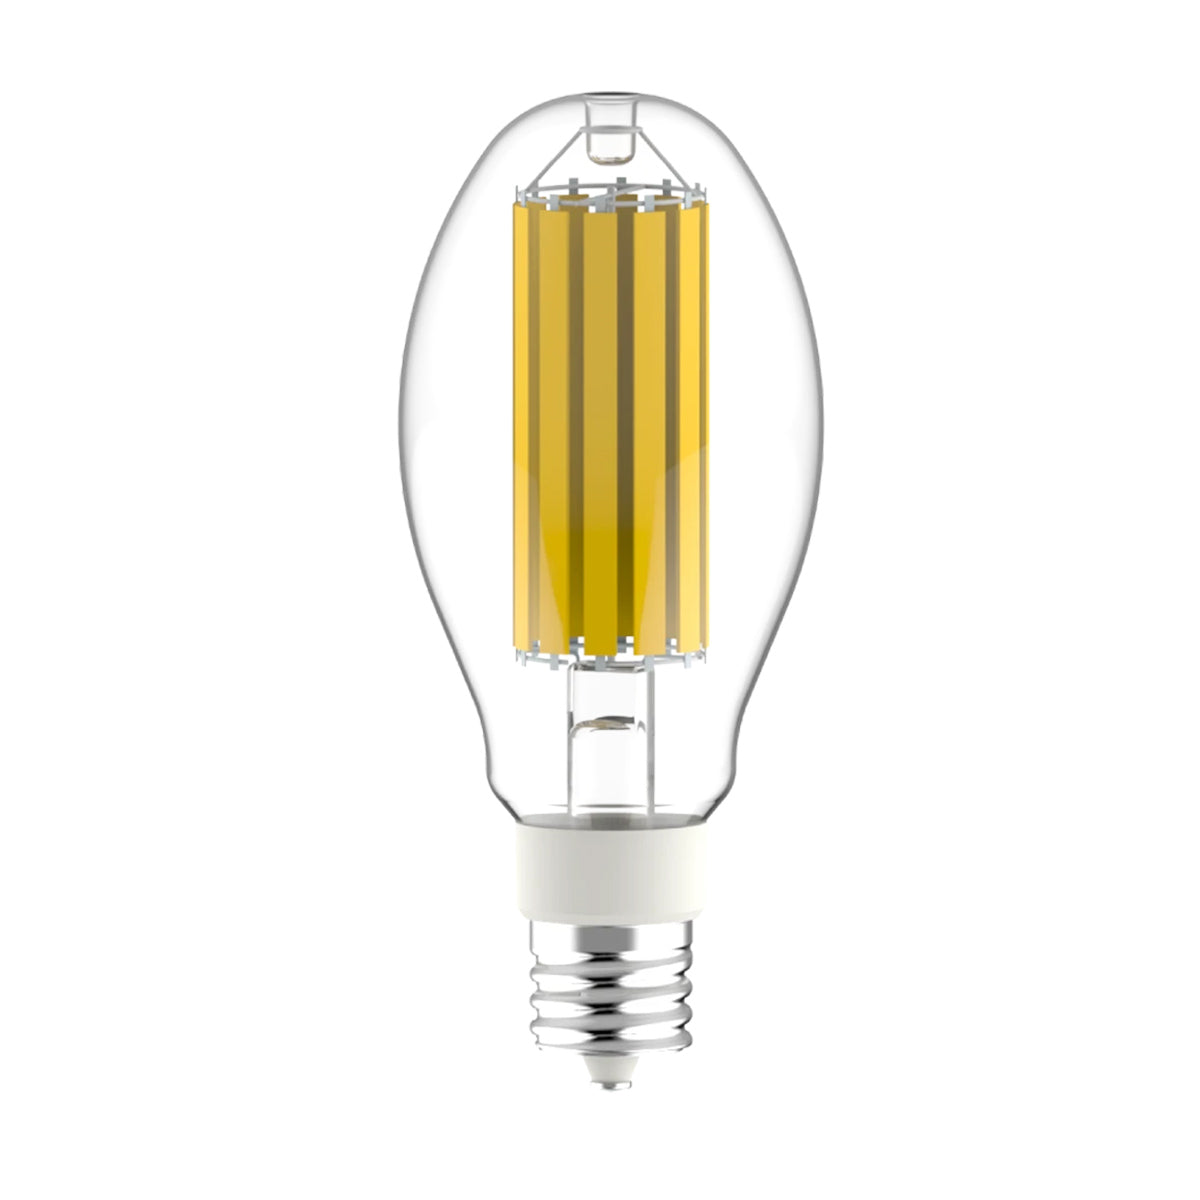 ED32 Filament HID Replacement Bulb, 300W MH Equivalent, 54 Watt, 10000 Lumens, 5000K, EX39 Mogul Extended Base, Clear Finish